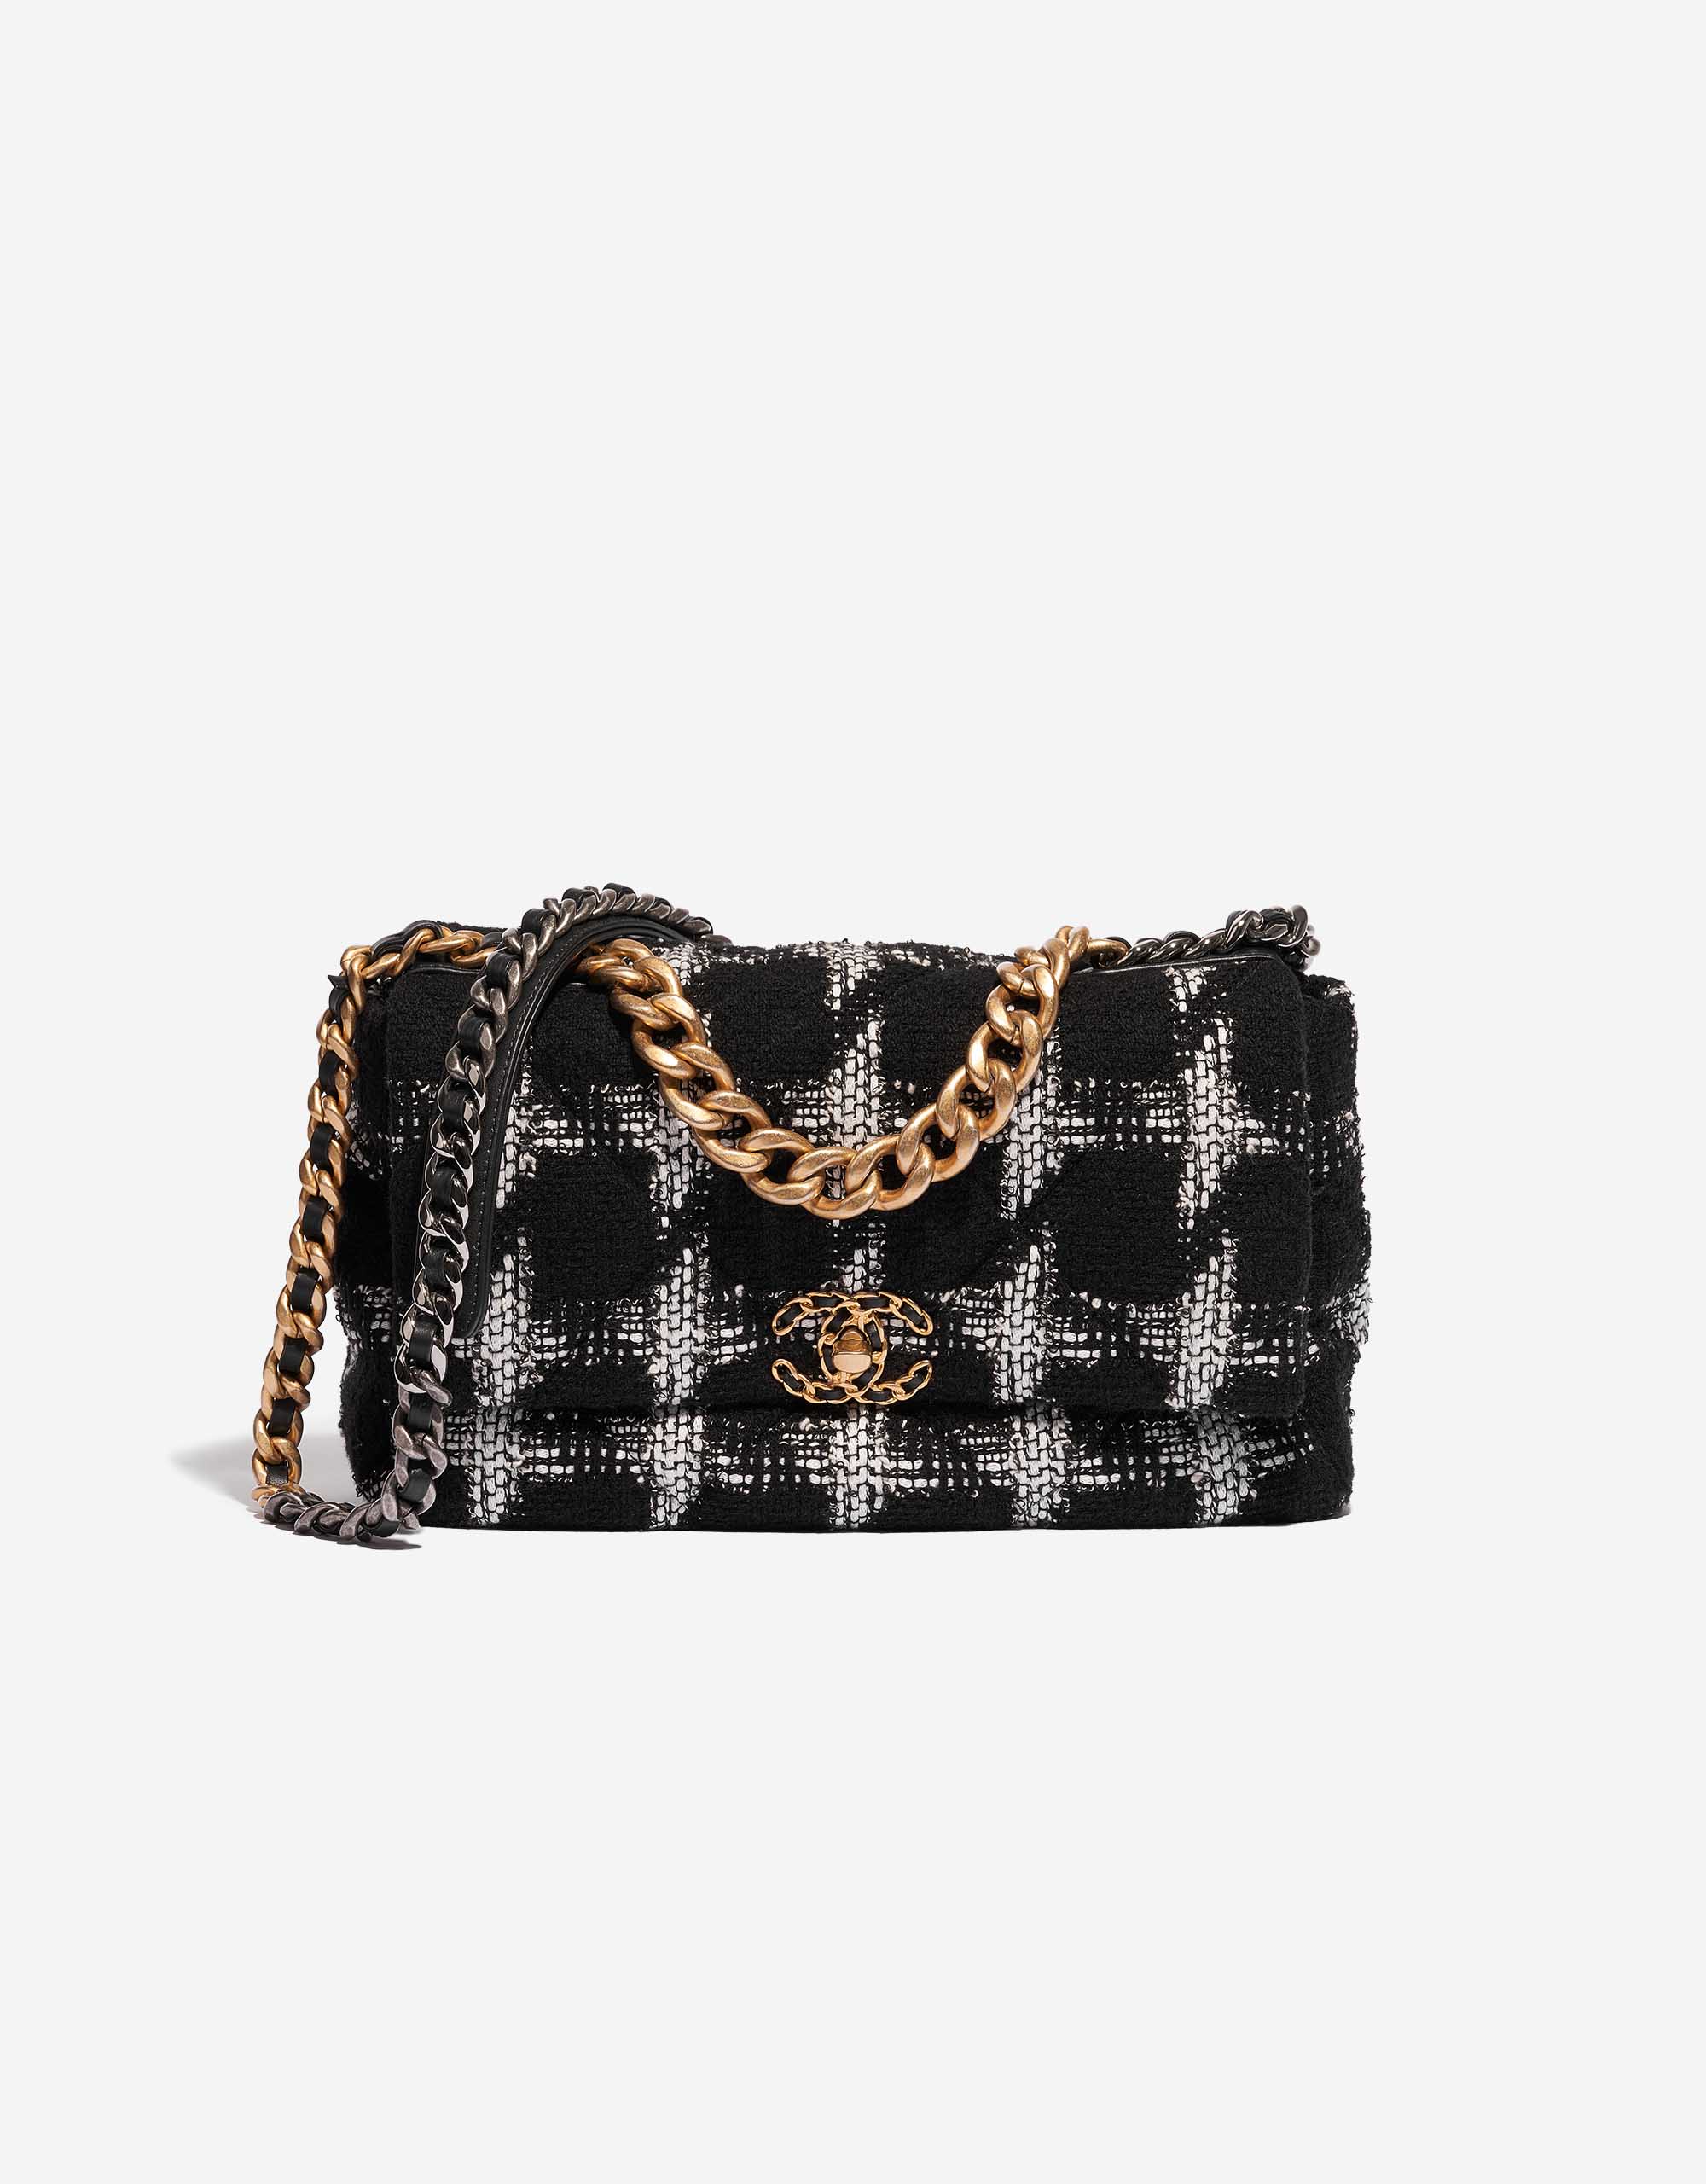 Chanel Black Patchwork Tweed Faux Fur Jumbo Flap Ruthenium Hardware,  2010-2011 Available For Immediate Sale At Sotheby's